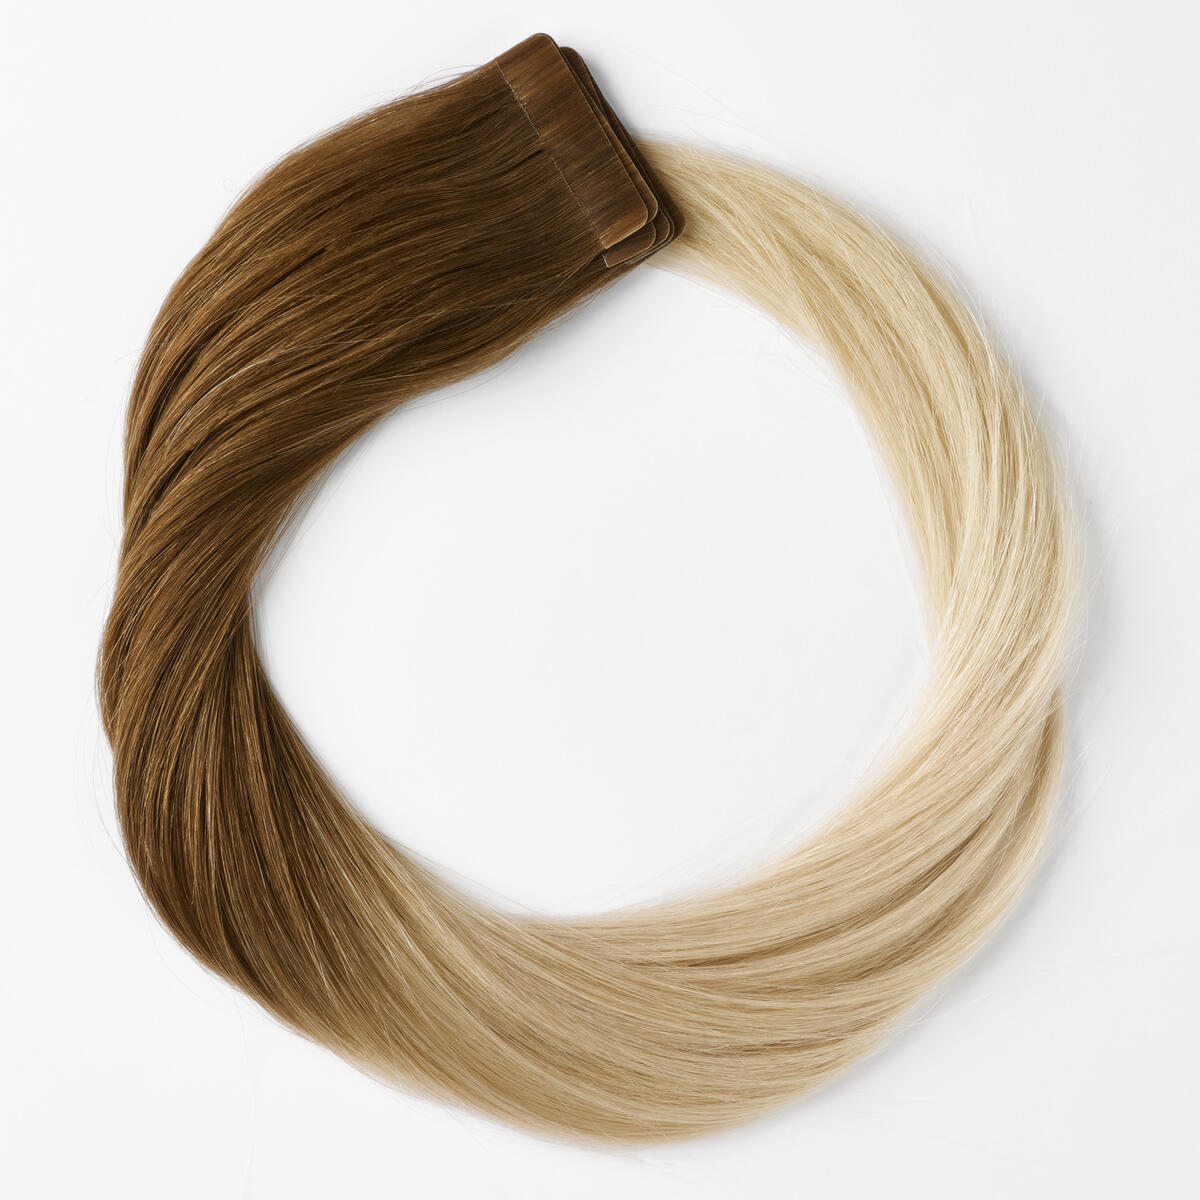 Basic Tape Extensions Classic 4 O5.1/10.8 Medium Ash Blond Ombre 40 cm